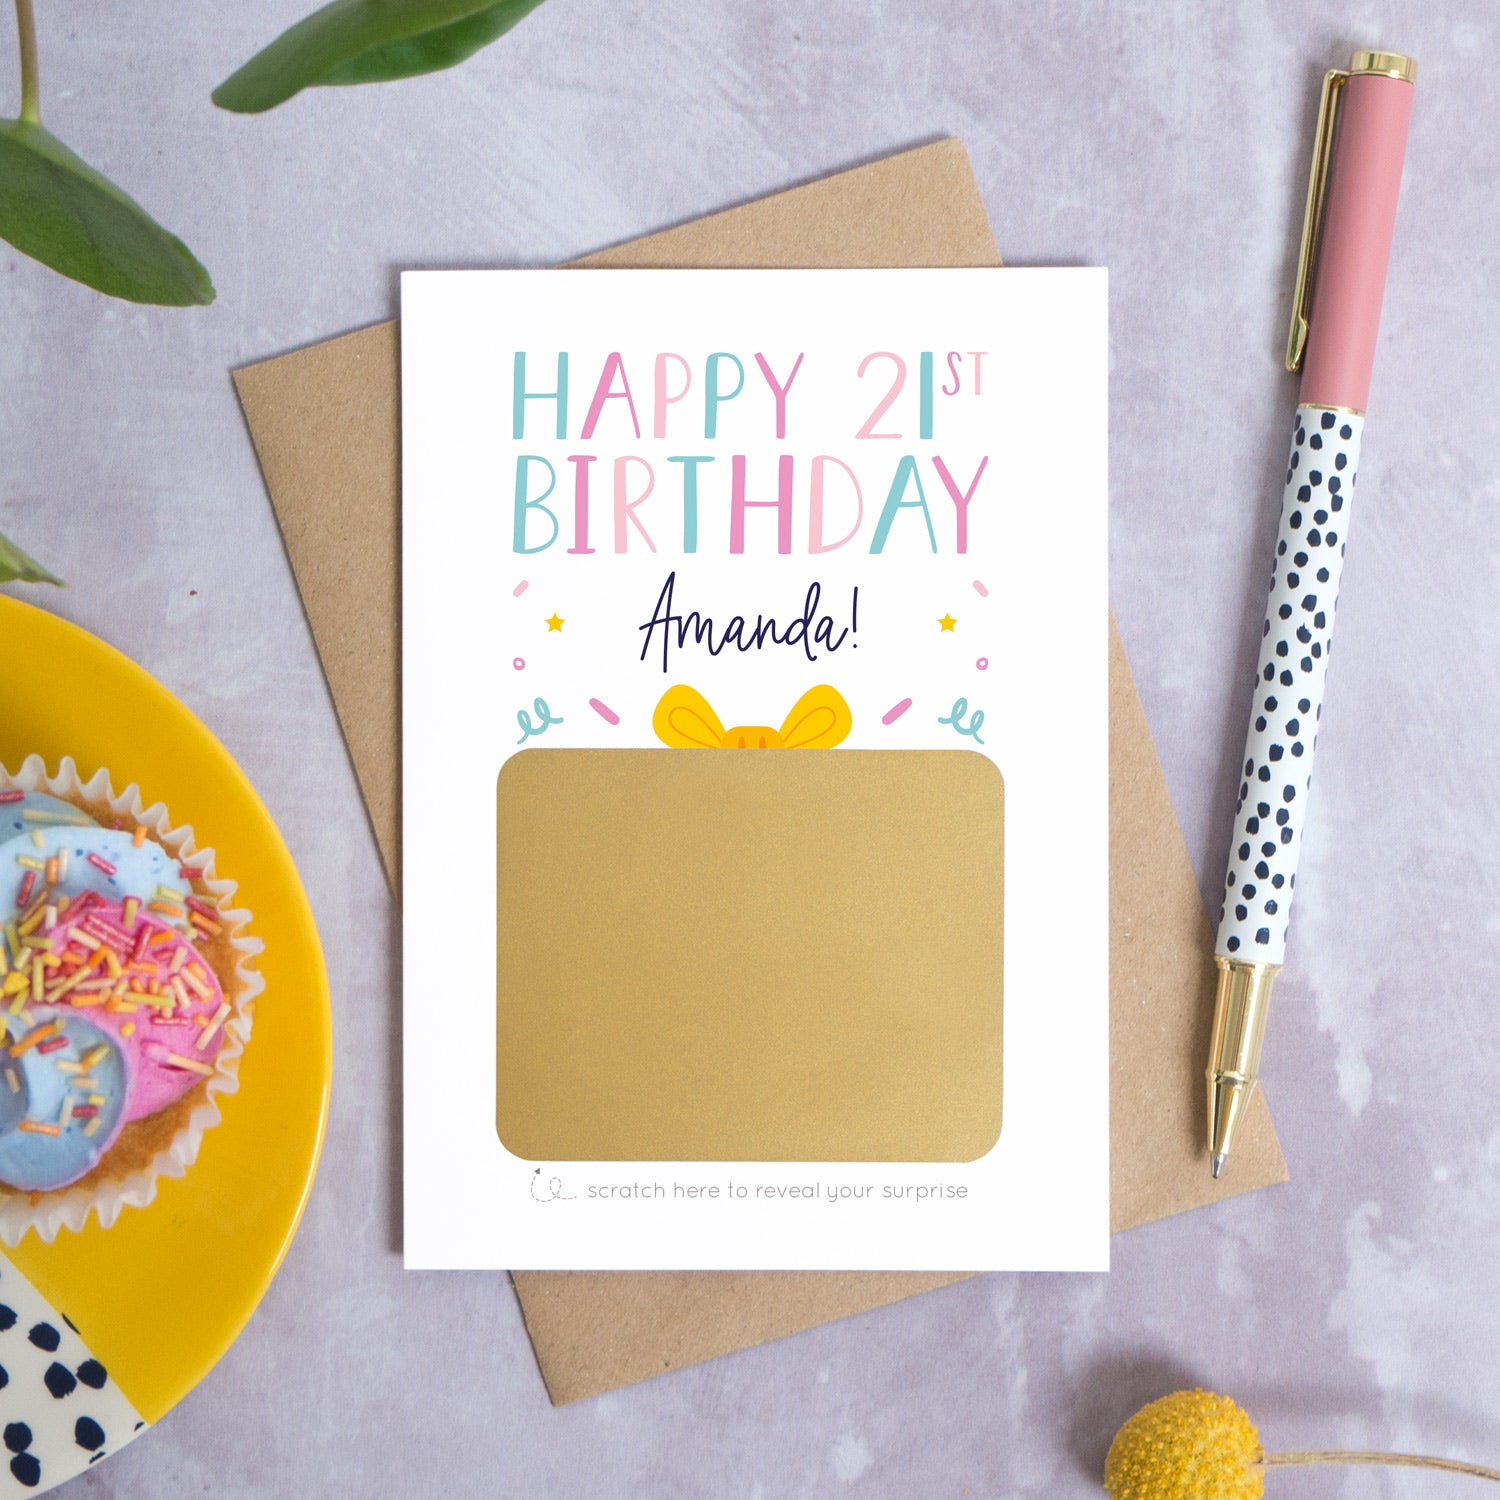 A personalised happy 21st birthday scratch card that has been photographed flat lay style on a grey concrete style background surrounded with foliage, a cupcake and a pen. The card itself shows how it will arrive and looks when it is completely unscratched.